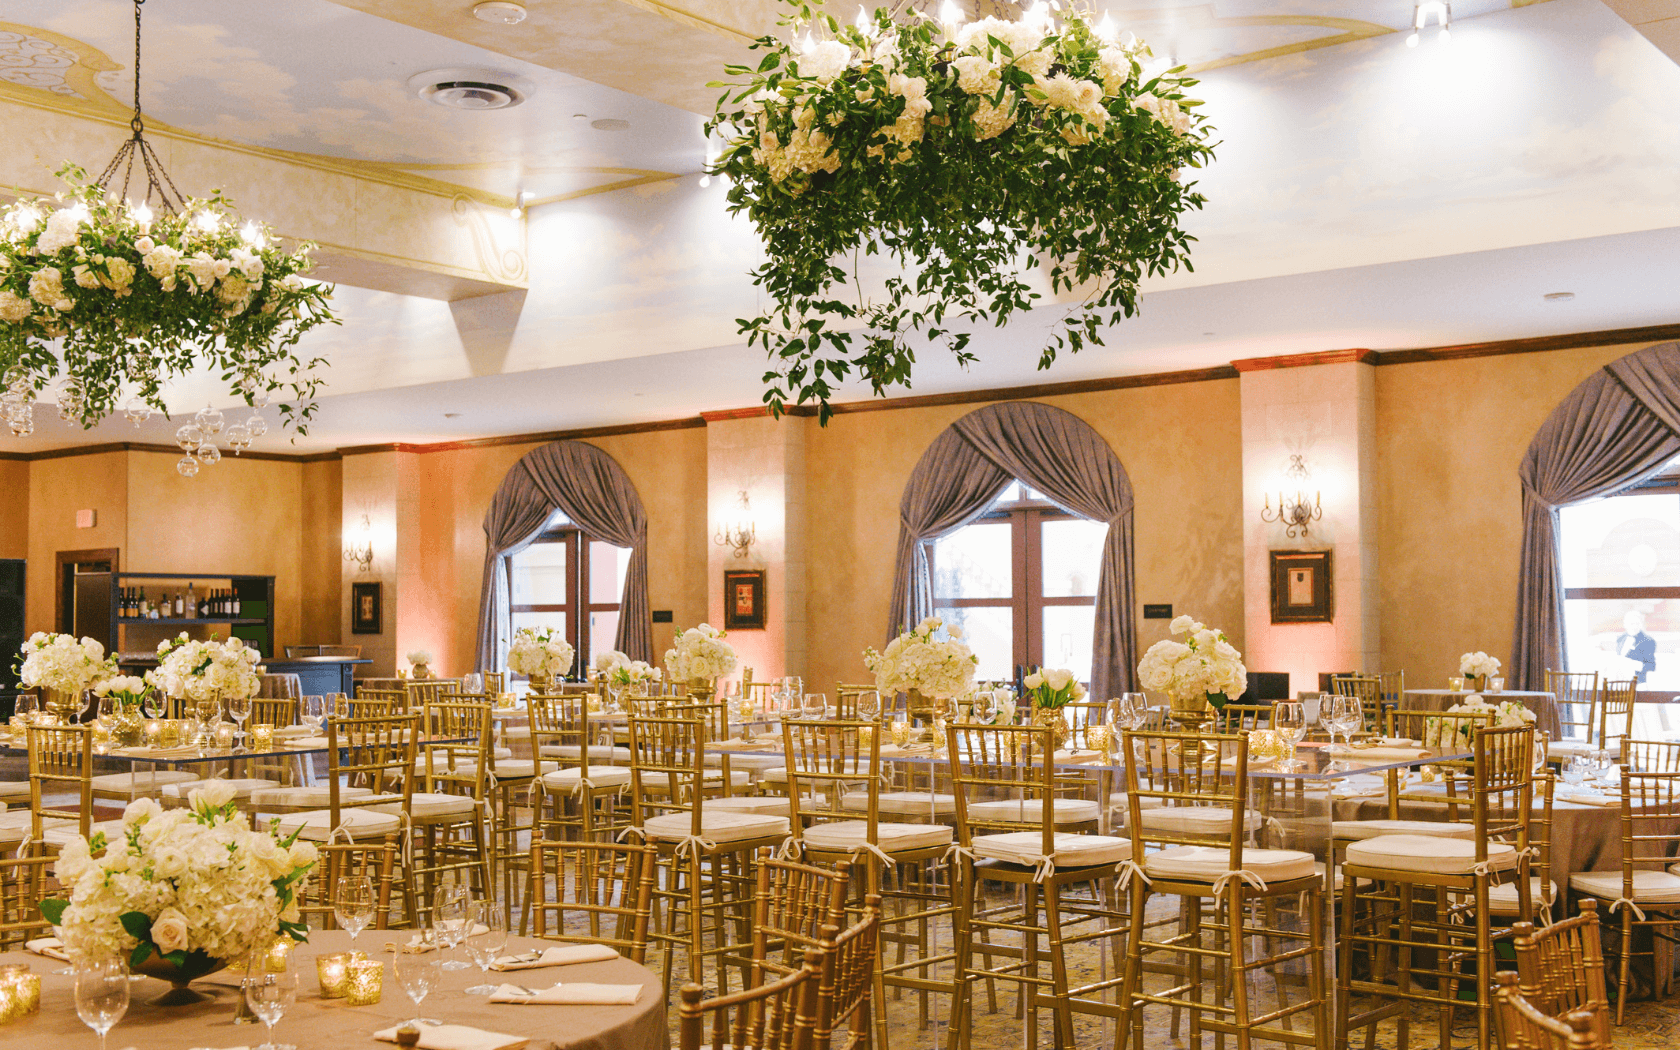 ballroom wedding reception with gold chiavari chairs, white floral arrangements, greenery hanging from chandeliers